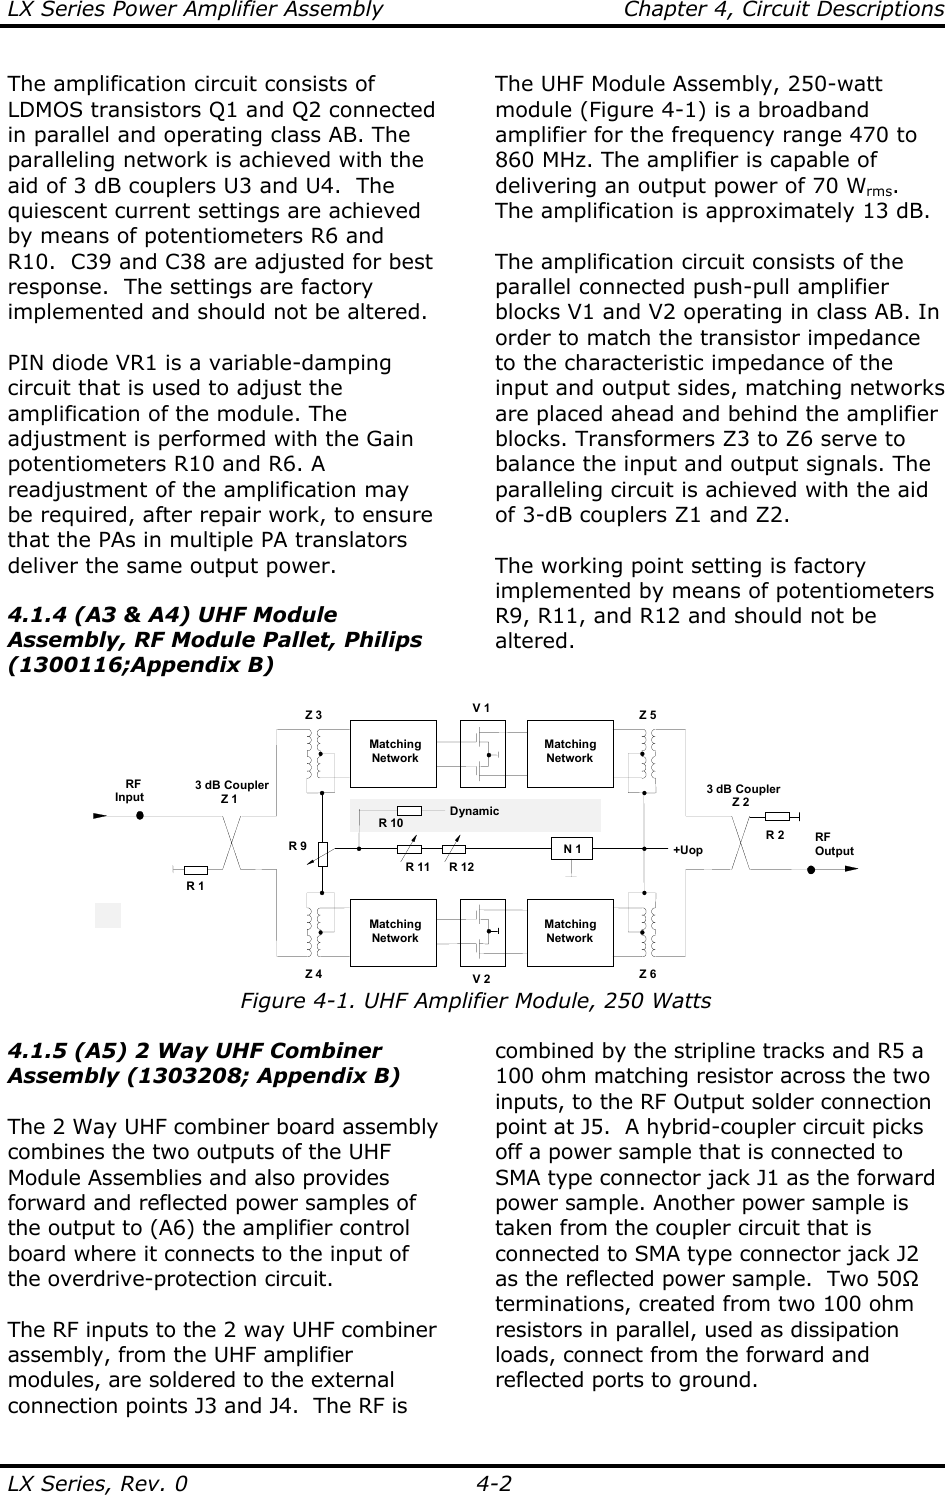 LX Series Power Amplifier Assembly    Chapter 4, Circuit Descriptions LX Series, Rev. 0    4-2 The amplification circuit consists of LDMOS transistors Q1 and Q2 connected in parallel and operating class AB. The paralleling network is achieved with the aid of 3 dB couplers U3 and U4.  The quiescent current settings are achieved by means of potentiometers R6 and R10.  C39 and C38 are adjusted for best response.  The settings are factory implemented and should not be altered.  PIN diode VR1 is a variable-damping circuit that is used to adjust the amplification of the module. The adjustment is performed with the Gain potentiometers R10 and R6. A readjustment of the amplification may be required, after repair work, to ensure that the PAs in multiple PA translators deliver the same output power.  4.1.4 (A3 &amp; A4) UHF Module Assembly, RF Module Pallet, Philips (1300116;Appendix B)  The UHF Module Assembly, 250-watt module (Figure 4-1) is a broadband amplifier for the frequency range 470 to 860 MHz. The amplifier is capable of delivering an output power of 70 Wrms. The amplification is approximately 13 dB.  The amplification circuit consists of the parallel connected push-pull amplifier blocks V1 and V2 operating in class AB. In order to match the transistor impedance to the characteristic impedance of the input and output sides, matching networks are placed ahead and behind the amplifier blocks. Transformers Z3 to Z6 serve to balance the input and output signals. The paralleling circuit is achieved with the aid of 3-dB couplers Z1 and Z2.  The working point setting is factory implemented by means of potentiometers R9, R11, and R12 and should not be altered.  V 13 dB CouplerZ 2RFOutputRFInput3 dB CouplerZ 1R 2R 1MatchingNetworkMatchingNetworkV 2MatchingNetworkMatchingNetworkZ 3 Z 5Z 4 Z 6+UopN 1R 11 R 12R 9R 10Dynamic Figure 4-1. UHF Amplifier Module, 250 Watts 4.1.5 (A5) 2 Way UHF Combiner Assembly (1303208; Appendix B)  The 2 Way UHF combiner board assembly combines the two outputs of the UHF Module Assemblies and also provides forward and reflected power samples of the output to (A6) the amplifier control board where it connects to the input of the overdrive-protection circuit.  The RF inputs to the 2 way UHF combiner assembly, from the UHF amplifier modules, are soldered to the external connection points J3 and J4.  The RF is combined by the stripline tracks and R5 a 100 ohm matching resistor across the two inputs, to the RF Output solder connection point at J5.  A hybrid-coupler circuit picks off a power sample that is connected to SMA type connector jack J1 as the forward power sample. Another power sample is taken from the coupler circuit that is connected to SMA type connector jack J2 as the reflected power sample.  Two 50Ω terminations, created from two 100 ohm resistors in parallel, used as dissipation loads, connect from the forward and reflected ports to ground.  